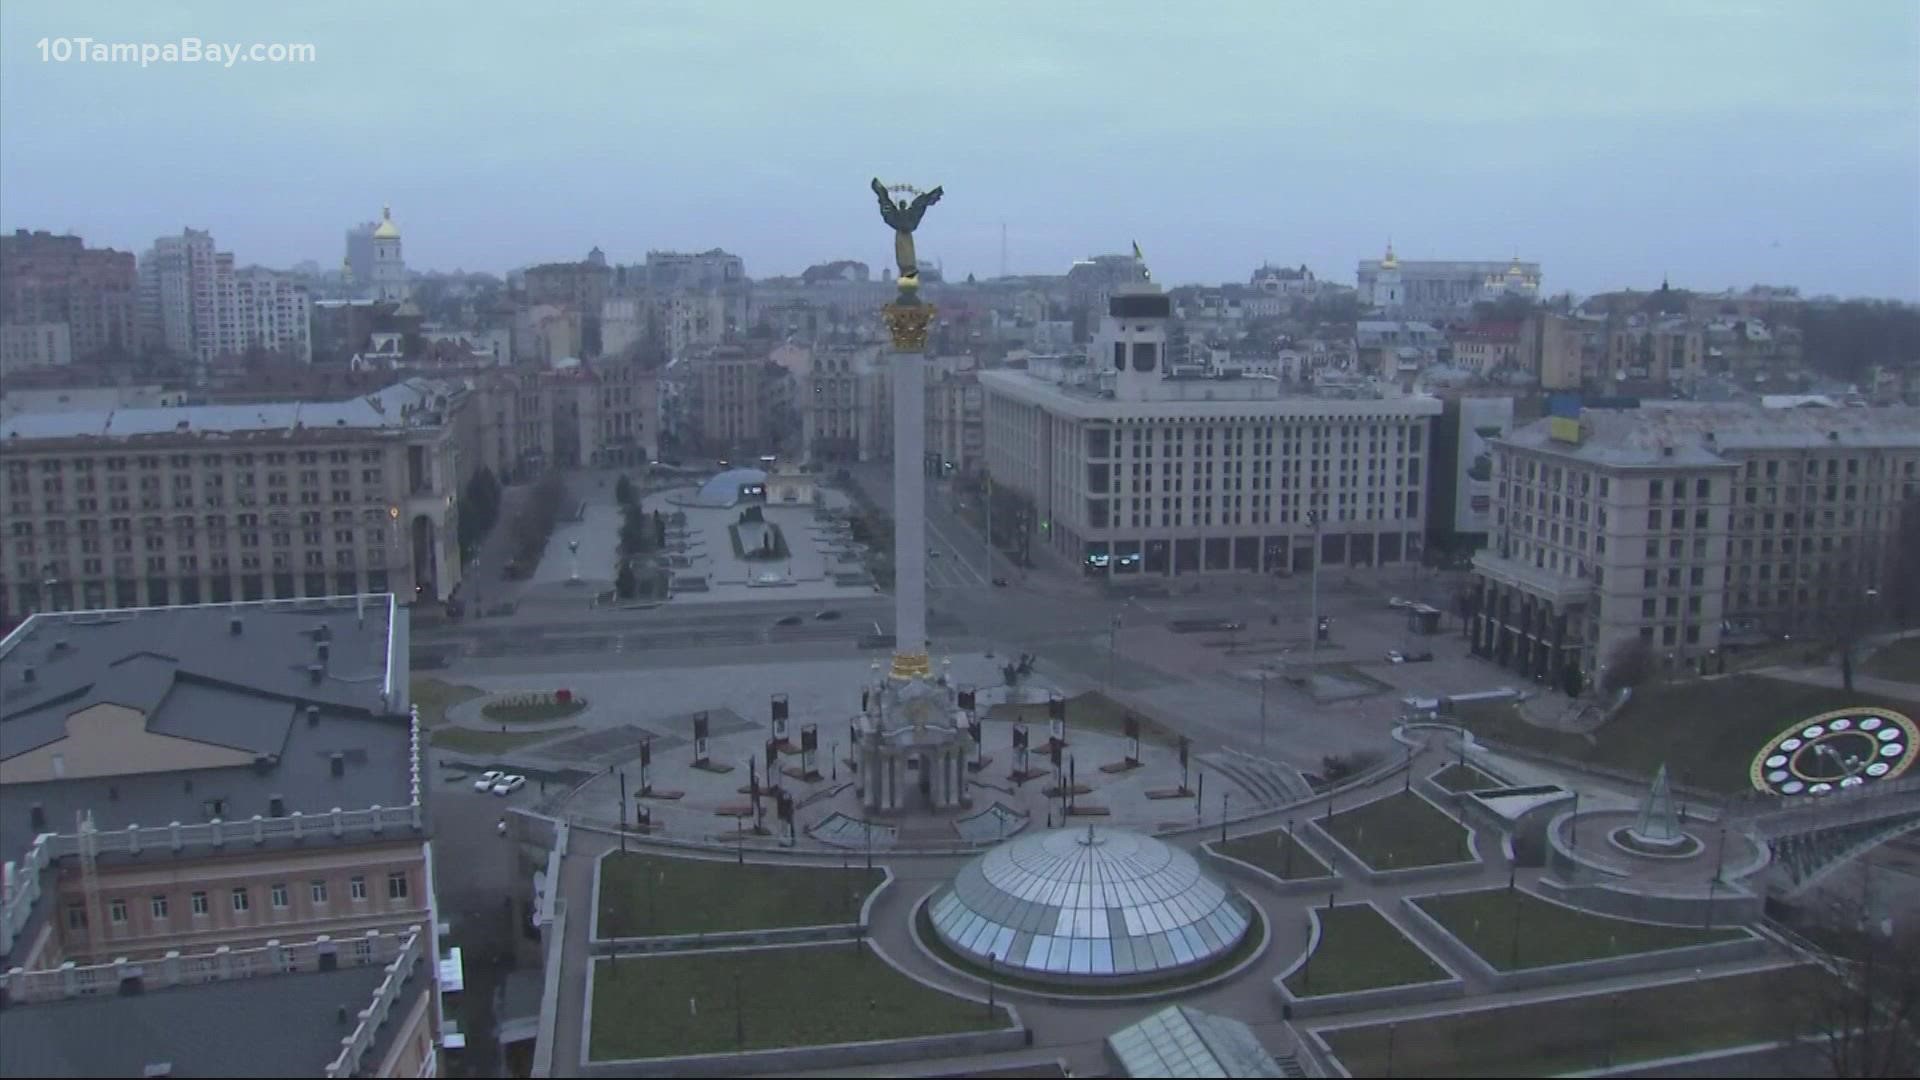 Explosions sounded before dawn in Kyiv as Ukraine's president pleaded for international help.